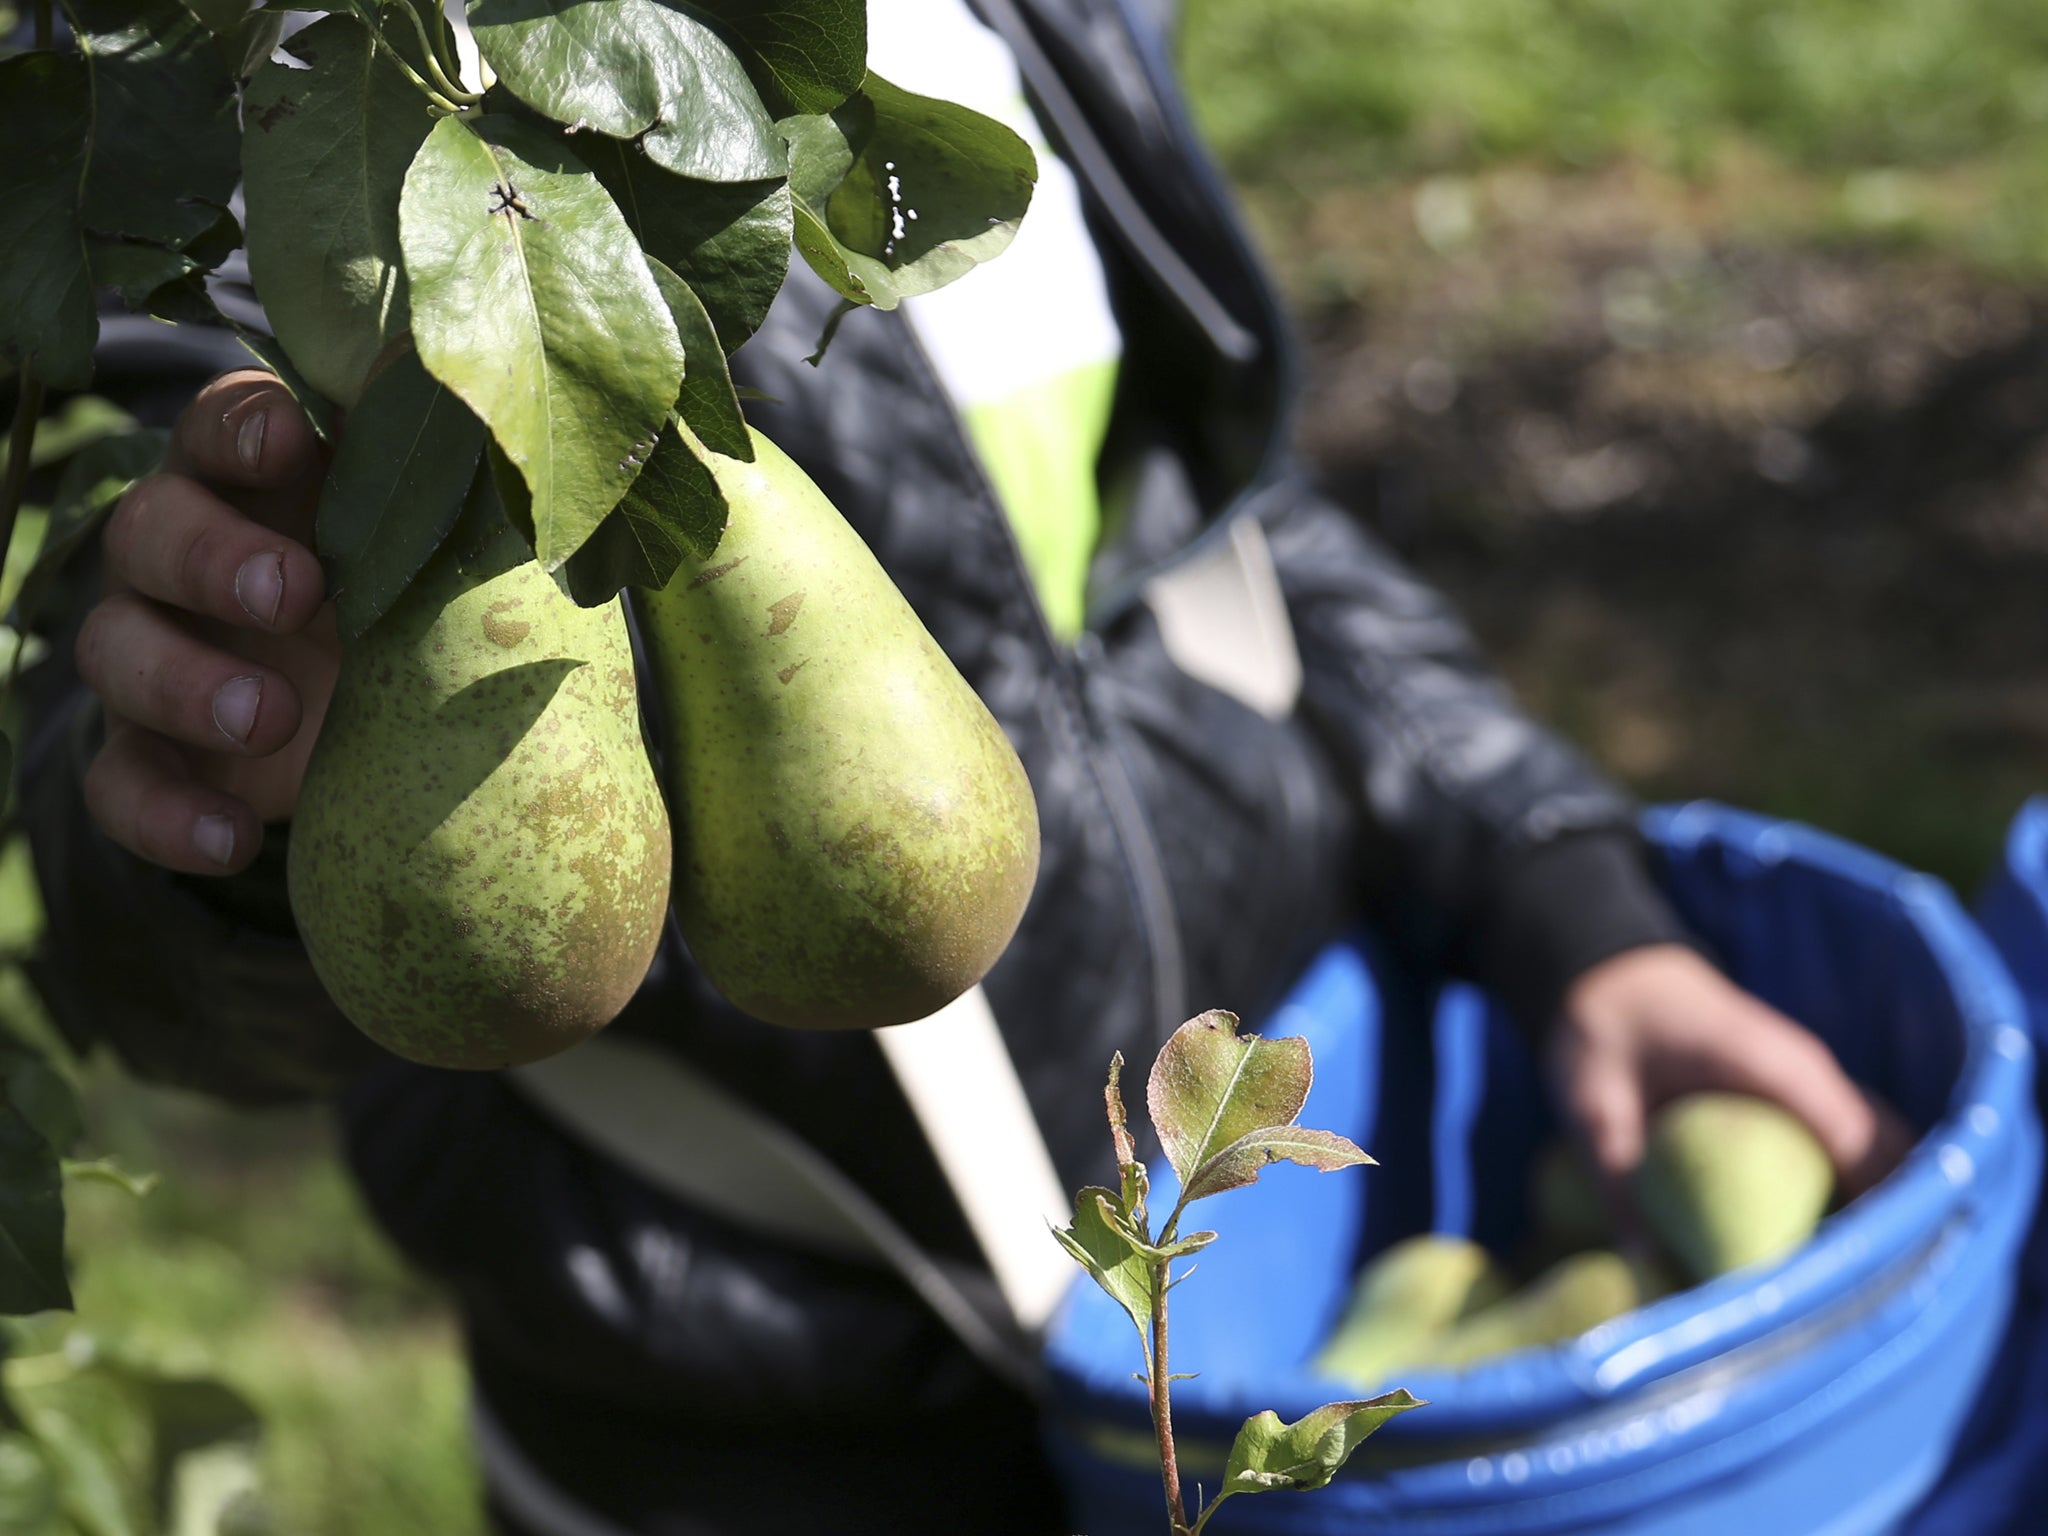 2014A worker picks pears from a tree during a harvest in an orchard in Hannut near Liege